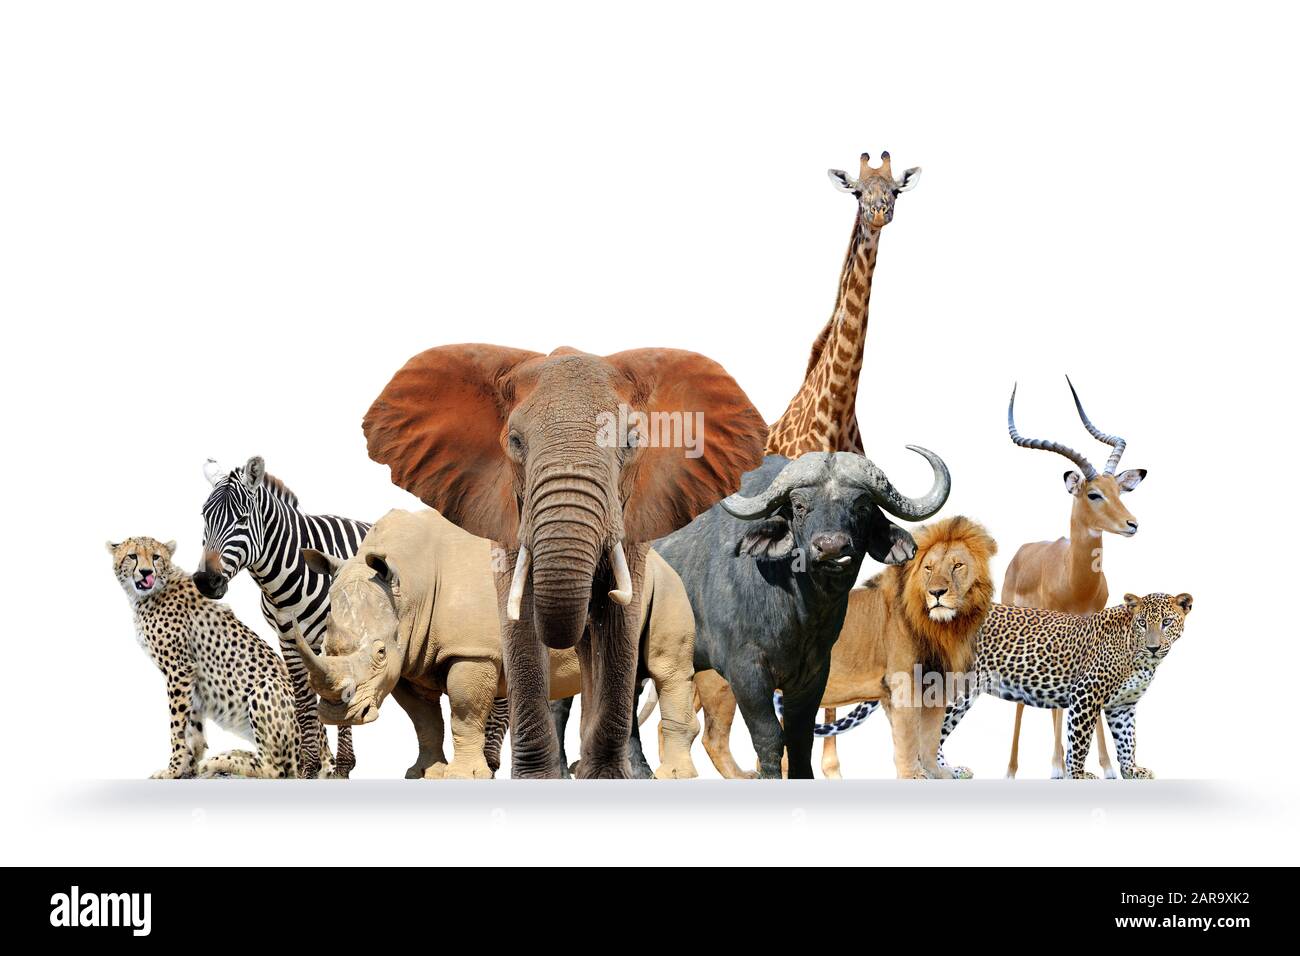 Jungle animals Cut Out Stock Images & Pictures - Alamy